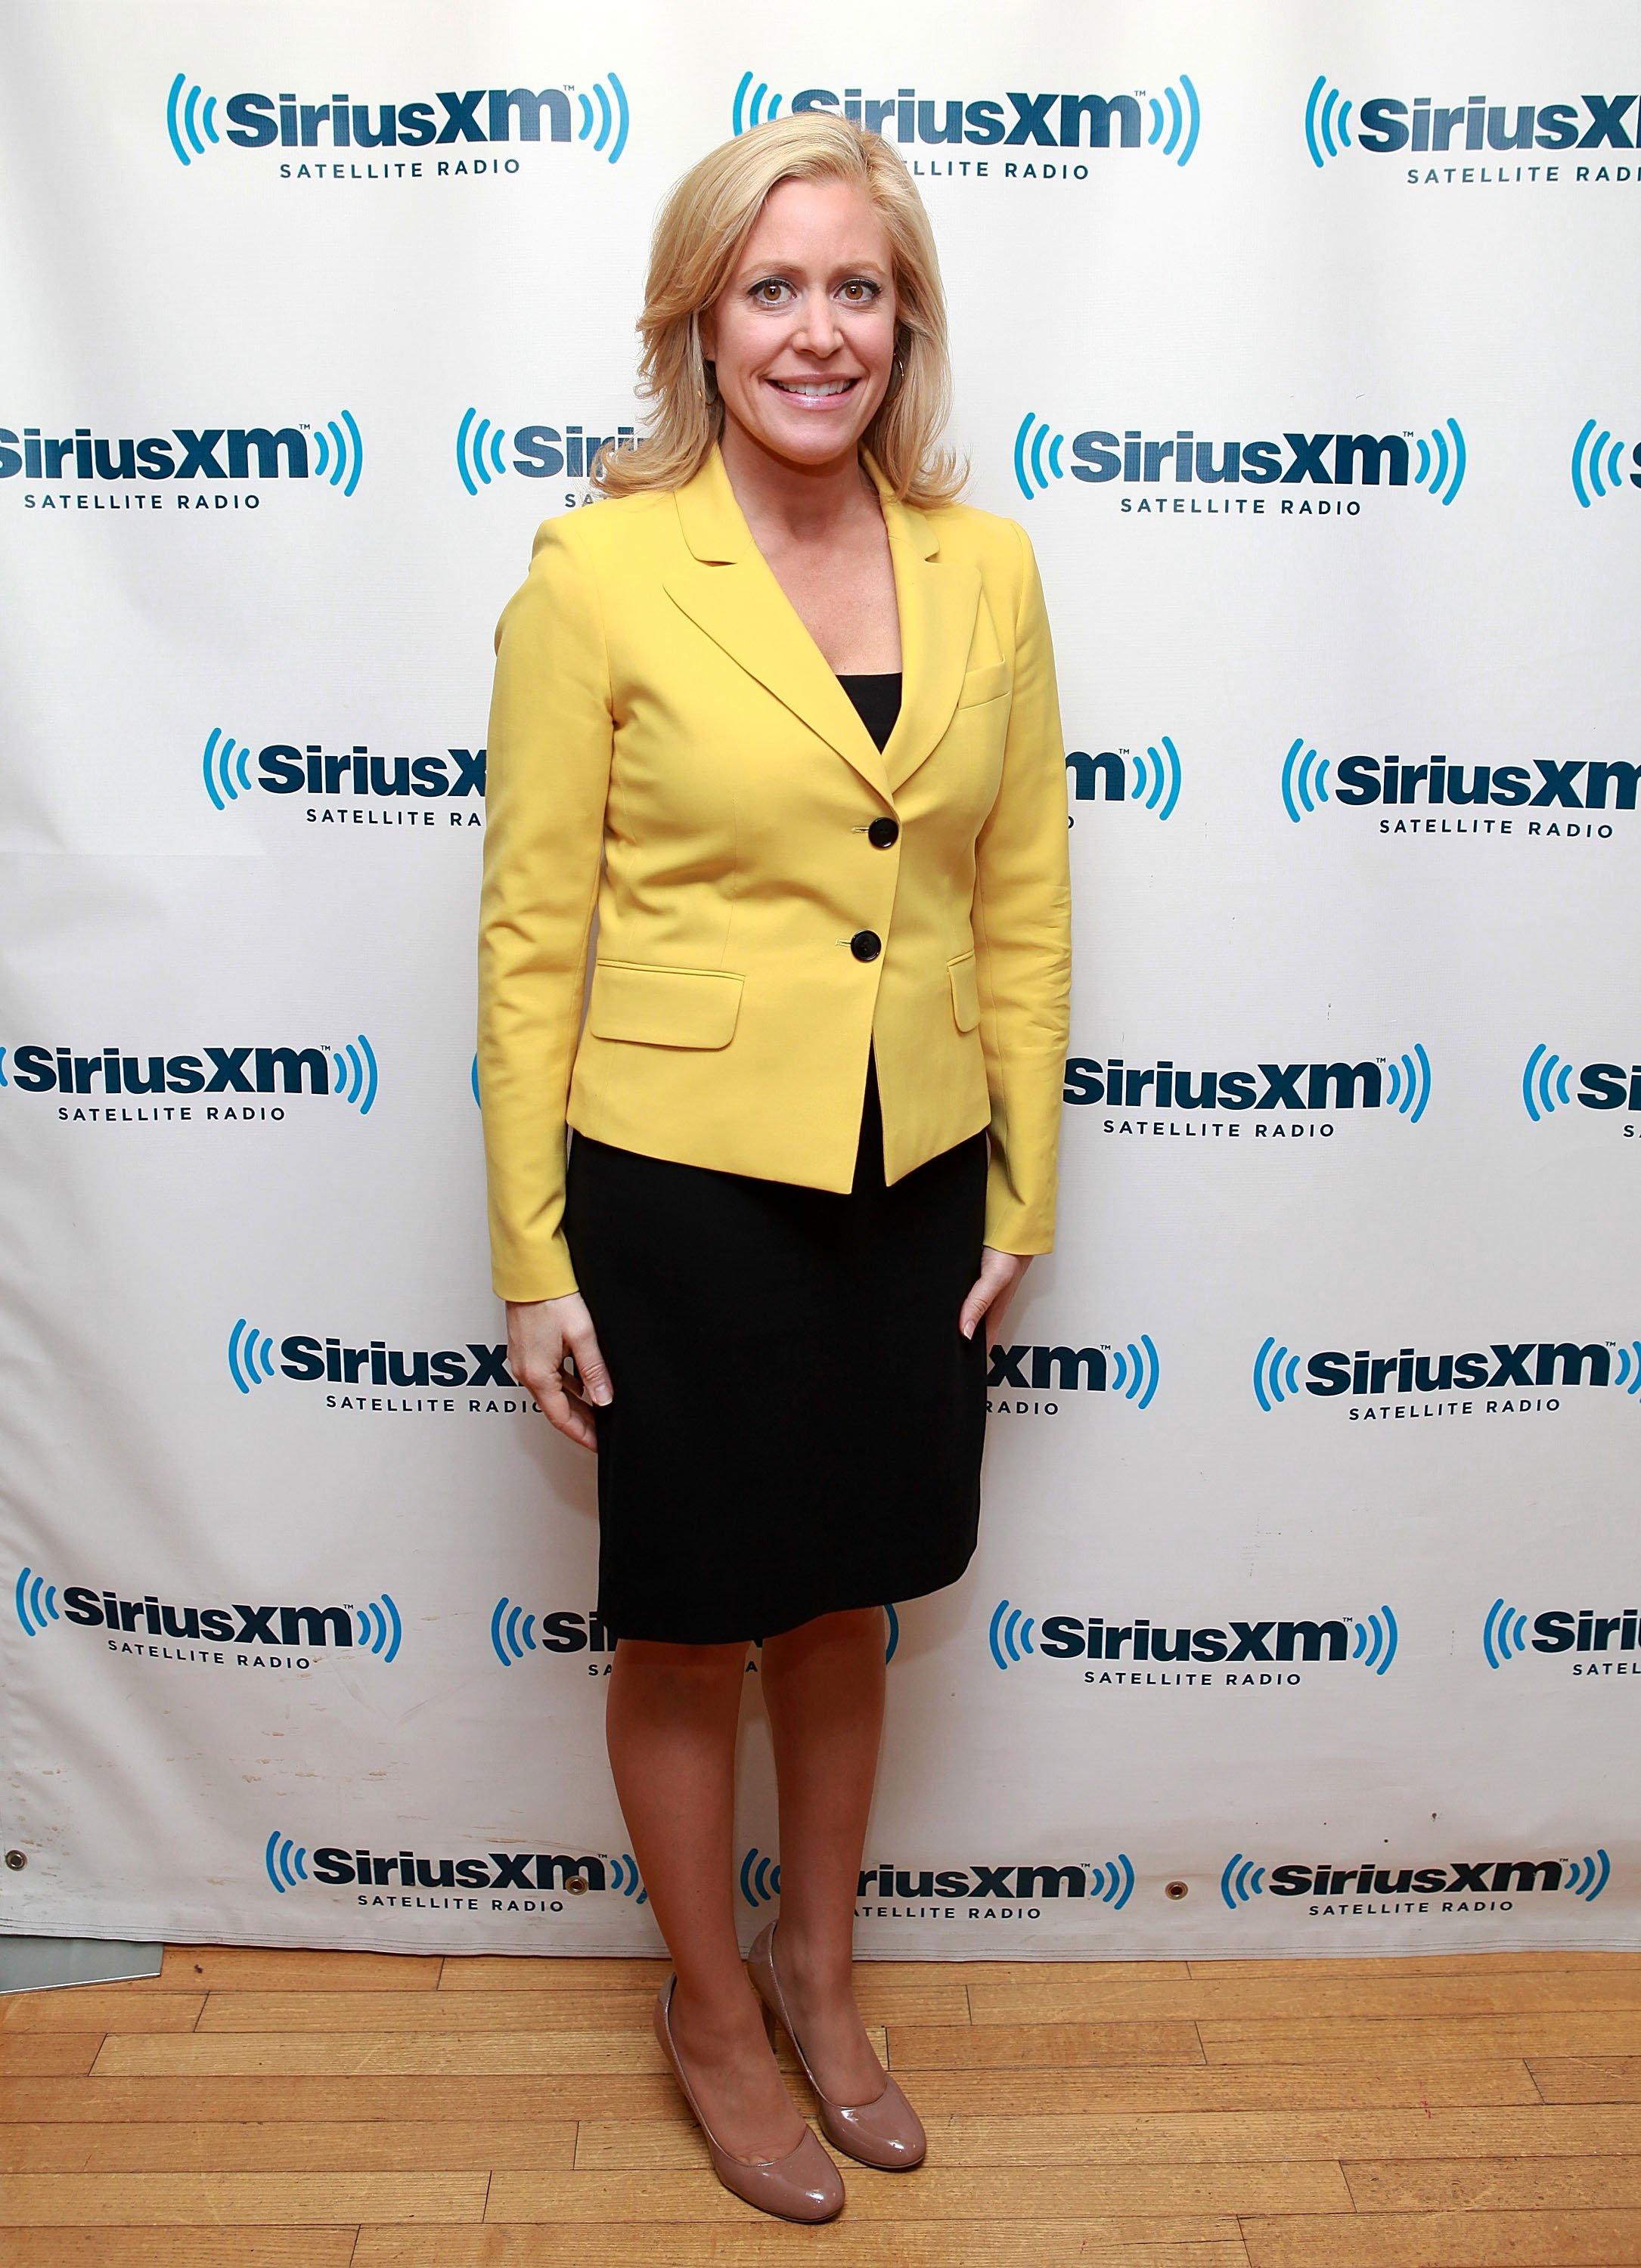 Melissa Francis visits the SiriusXM Studios on November 13, 2012 in New York City. | Photo by Robin Marchant/Getty Images